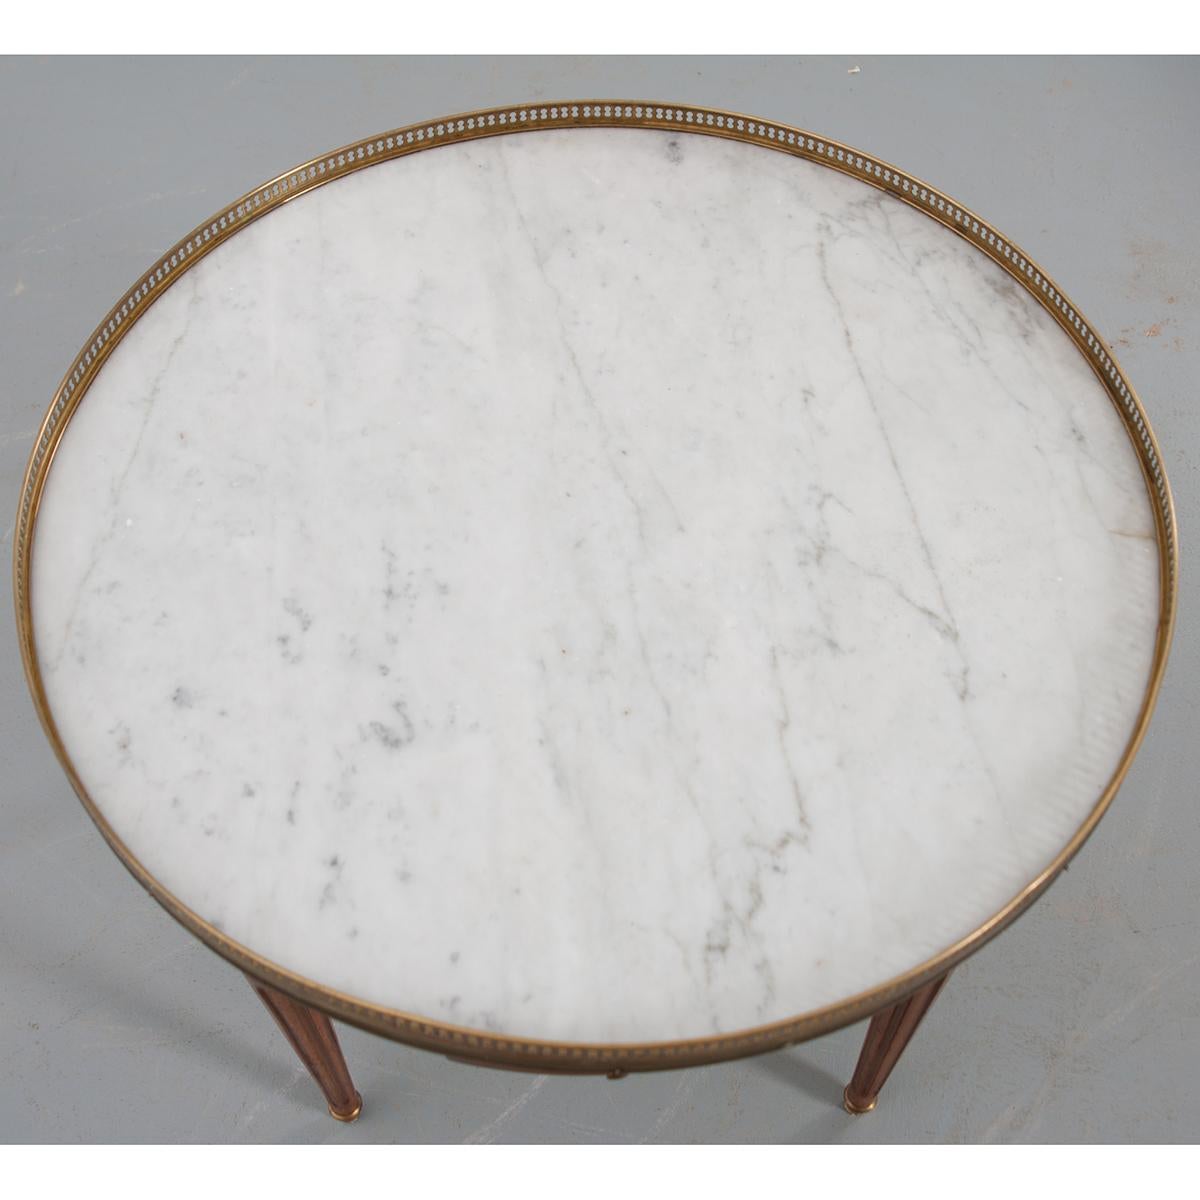 A classic example of a Louis XVI style marble-top guéridon coffee table, with brass gallery. The white marble top with reticulated brass gallery rests over an apron having two drawers and two green leather-topped slides, all with brass pulls. Fluted